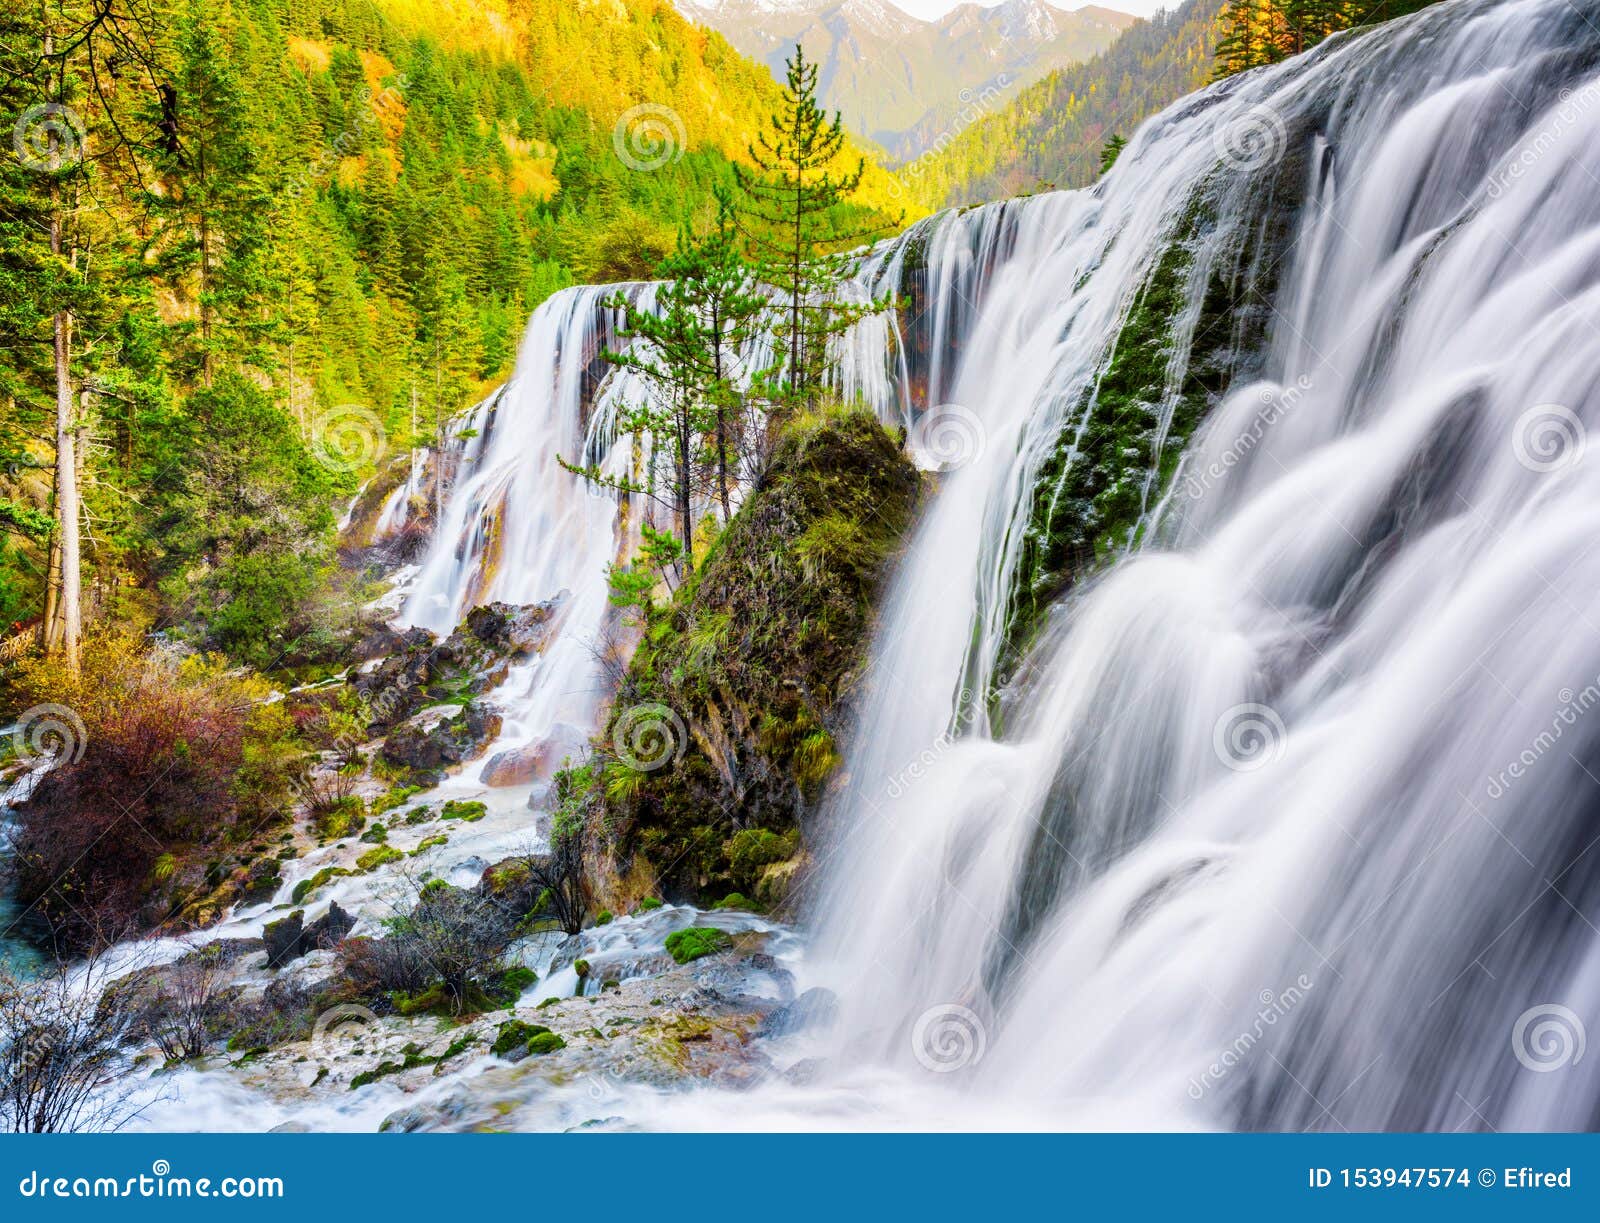 The Pearl Shoals Waterfall Among Wooded Mountains At Sunset Stock Photo